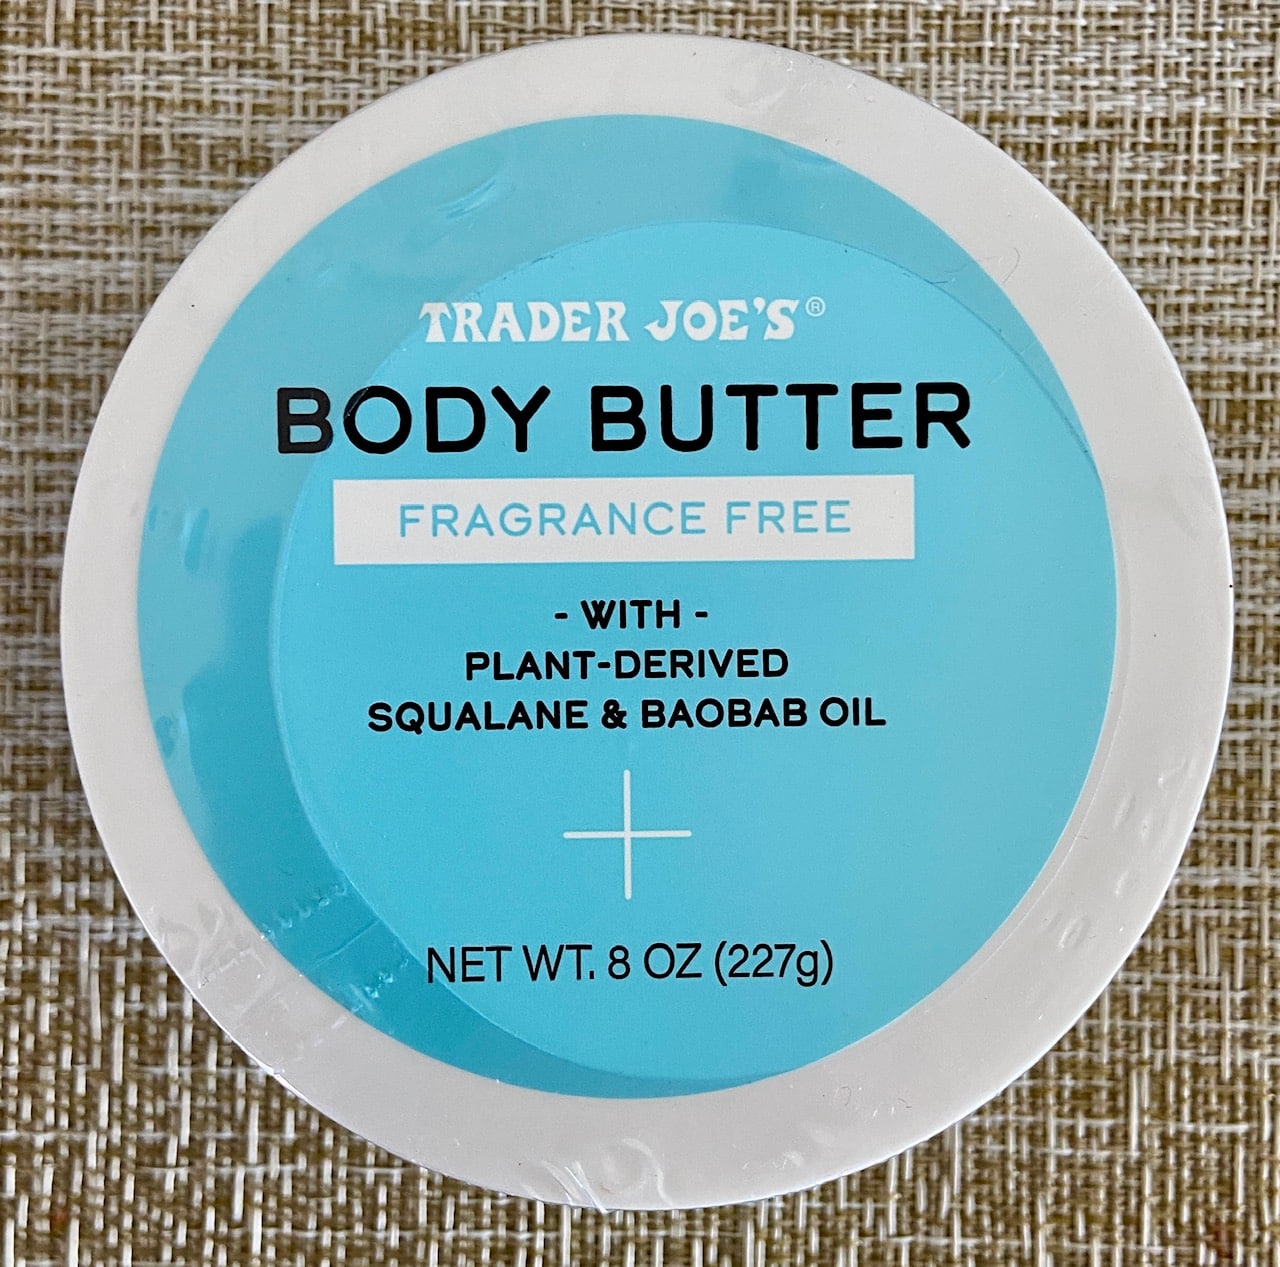 Trader Joe's Fragrance Free Body Butter Review